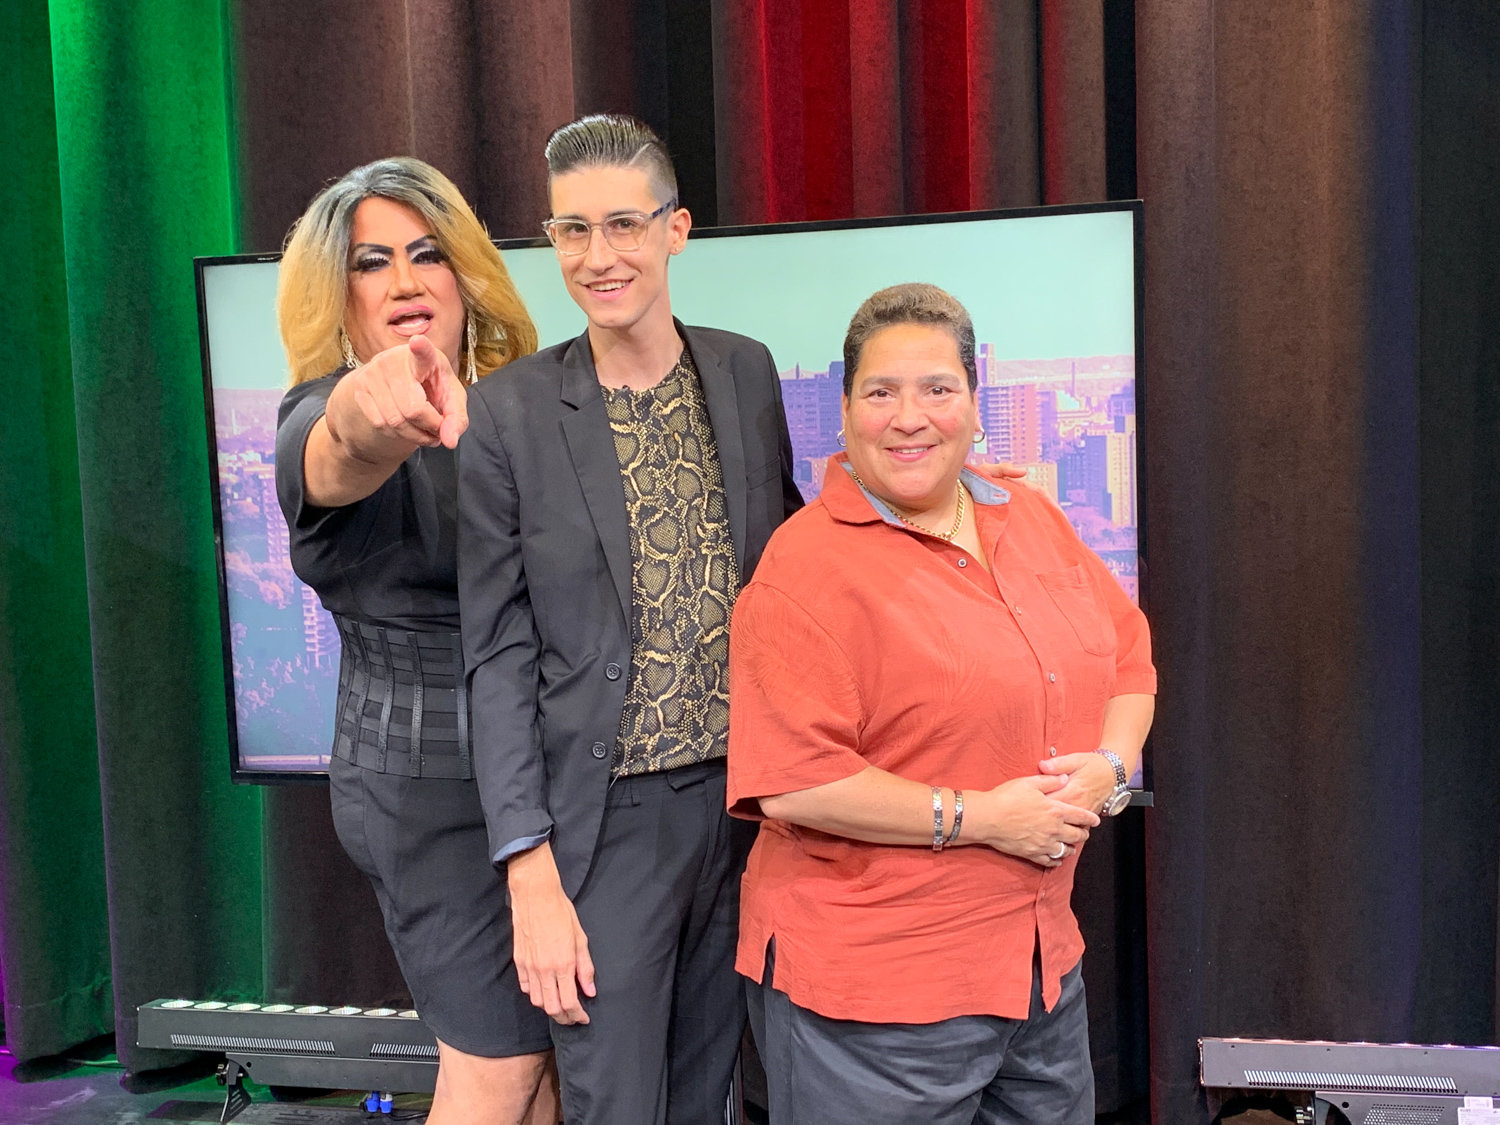 ‘Out Loud’ host Anthony Parker, center, stands with local personality Apollonia Cruz, left, better known as ‘Queen of the Bronx,’ as well as Audrey DeJesus, right, an entrepreneur who hopes to open a gay bar in the borough.